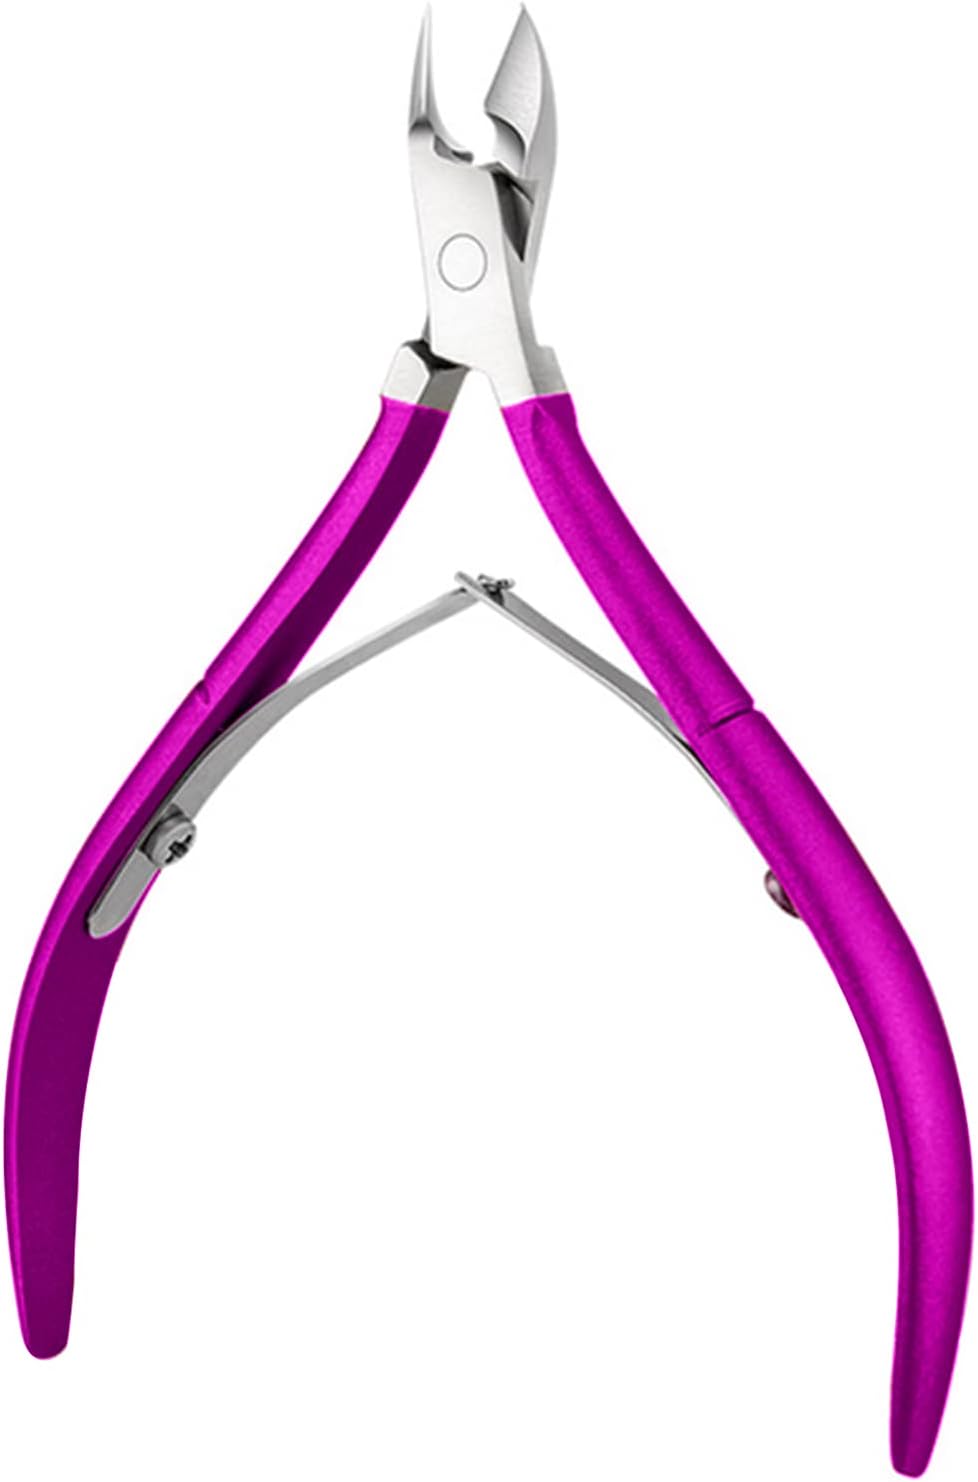 Professional Cuticle Nippers, Cuticle Scissors, Stainless Steel Cuticle Scissors, Sharp Cut, Fine for Removing Excess Cracked Skin on Fingers and Toes, French Handle (purple)